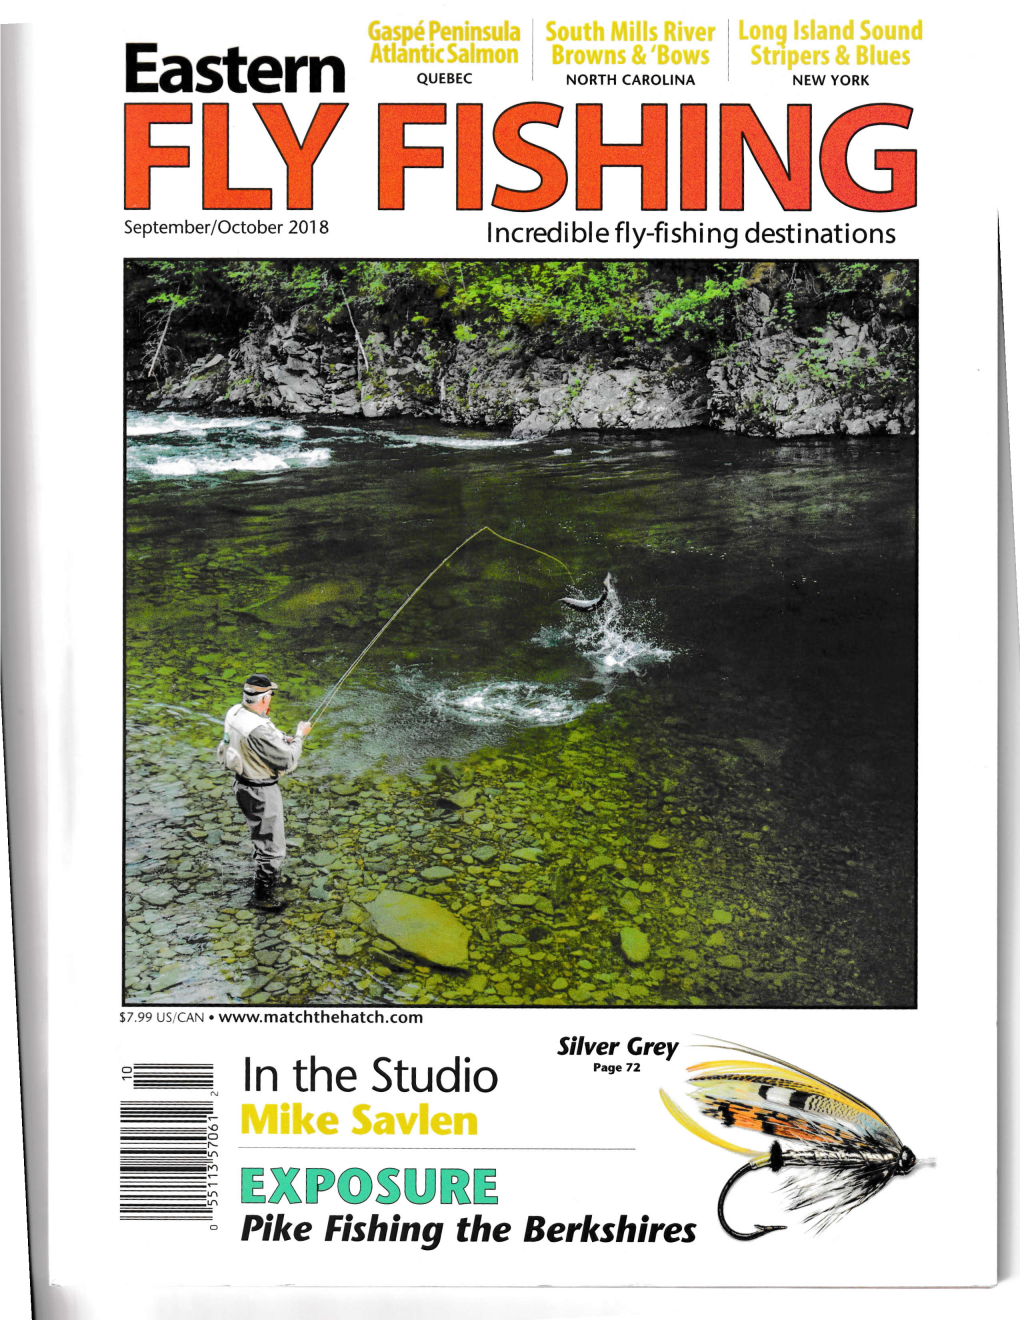 Read More Here in Our Paulins Kill Article in Eastern Fly Fishing